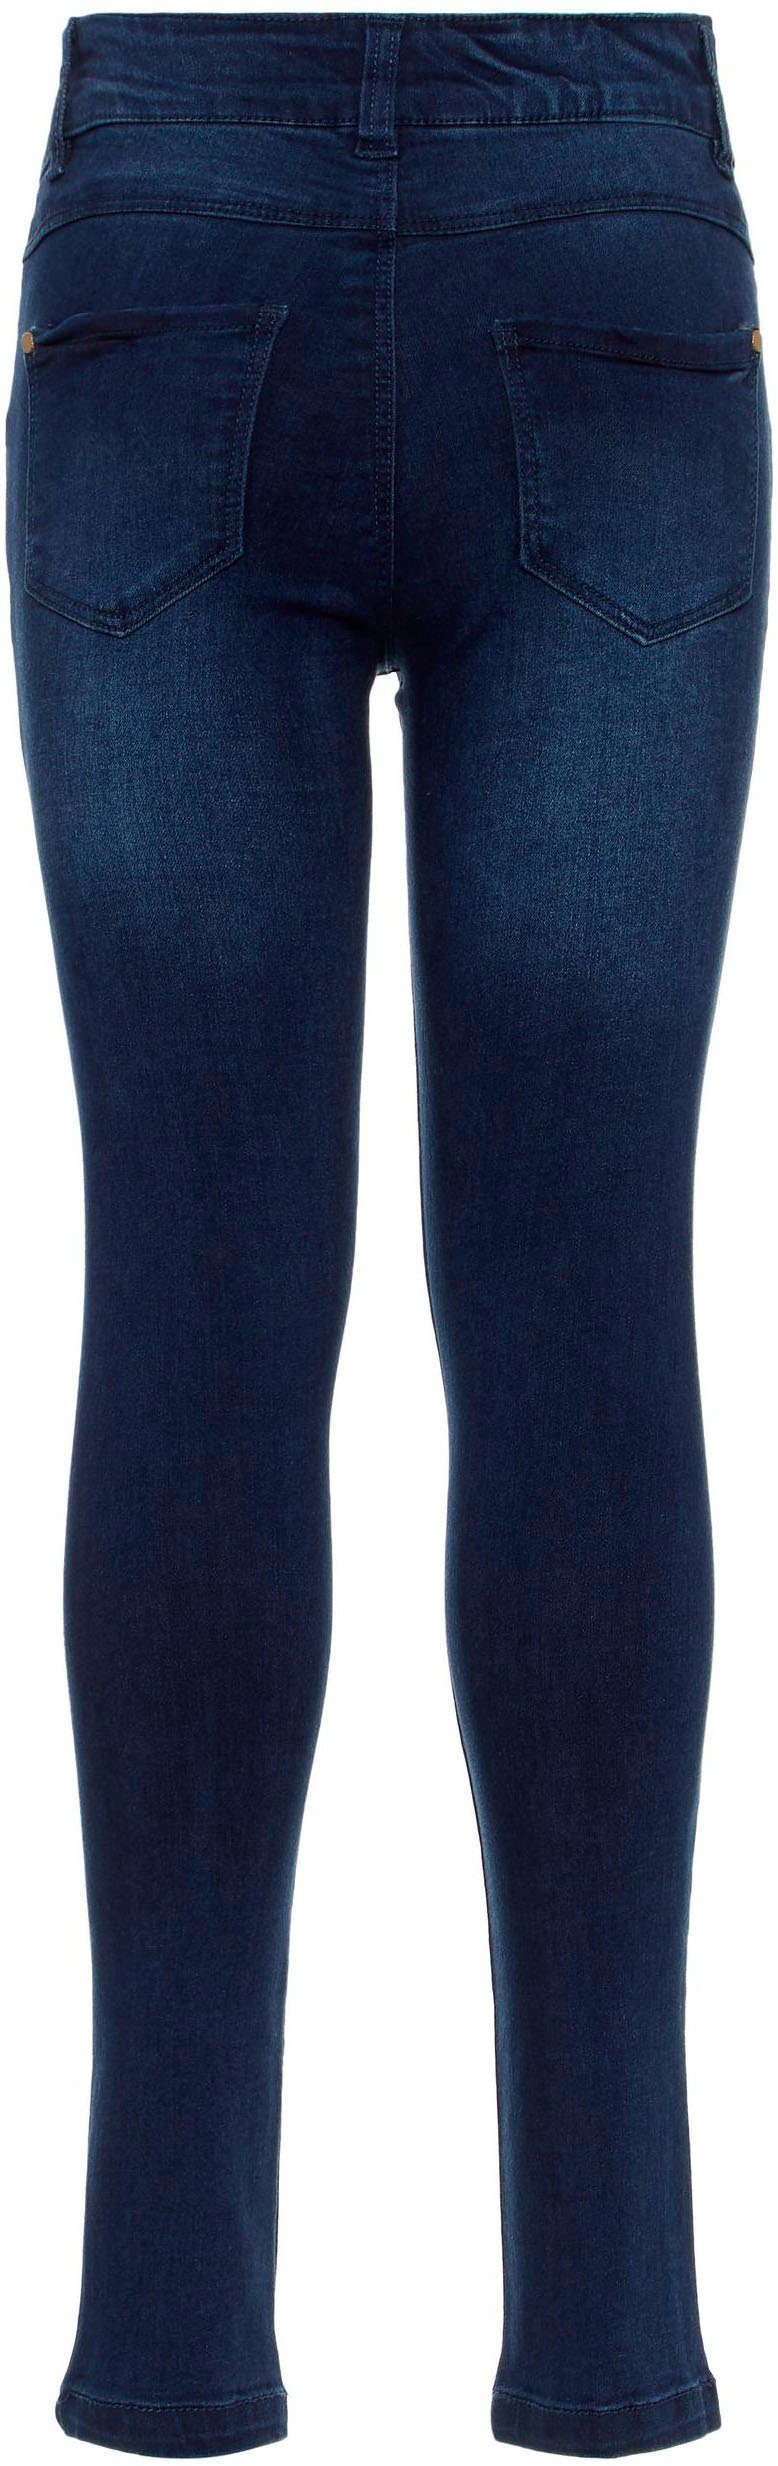 NKFPOLLY Name schmaler in It Stretch-Jeans Passform